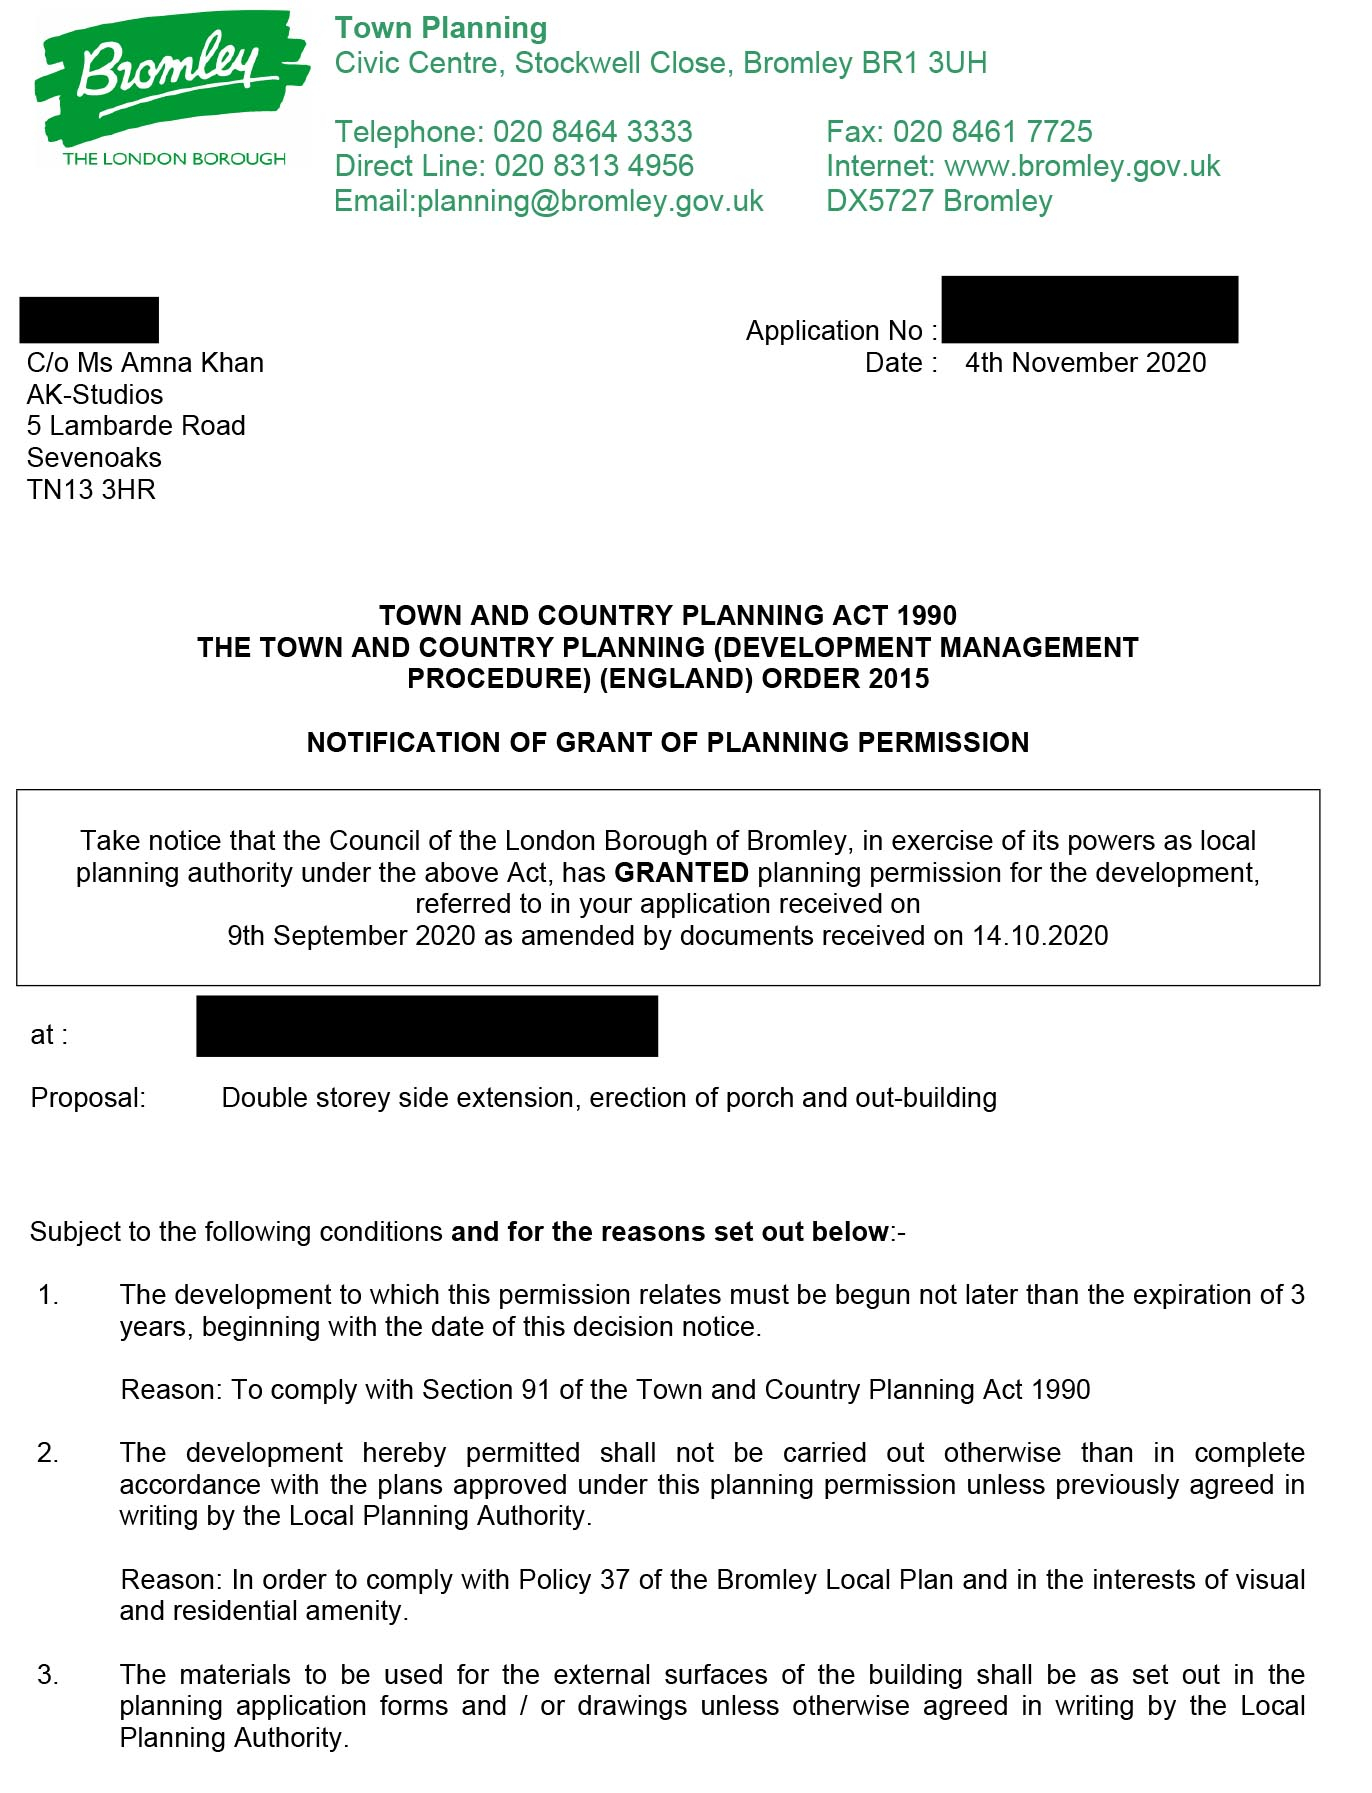 Planning Application Approved Bromley London Borough Council